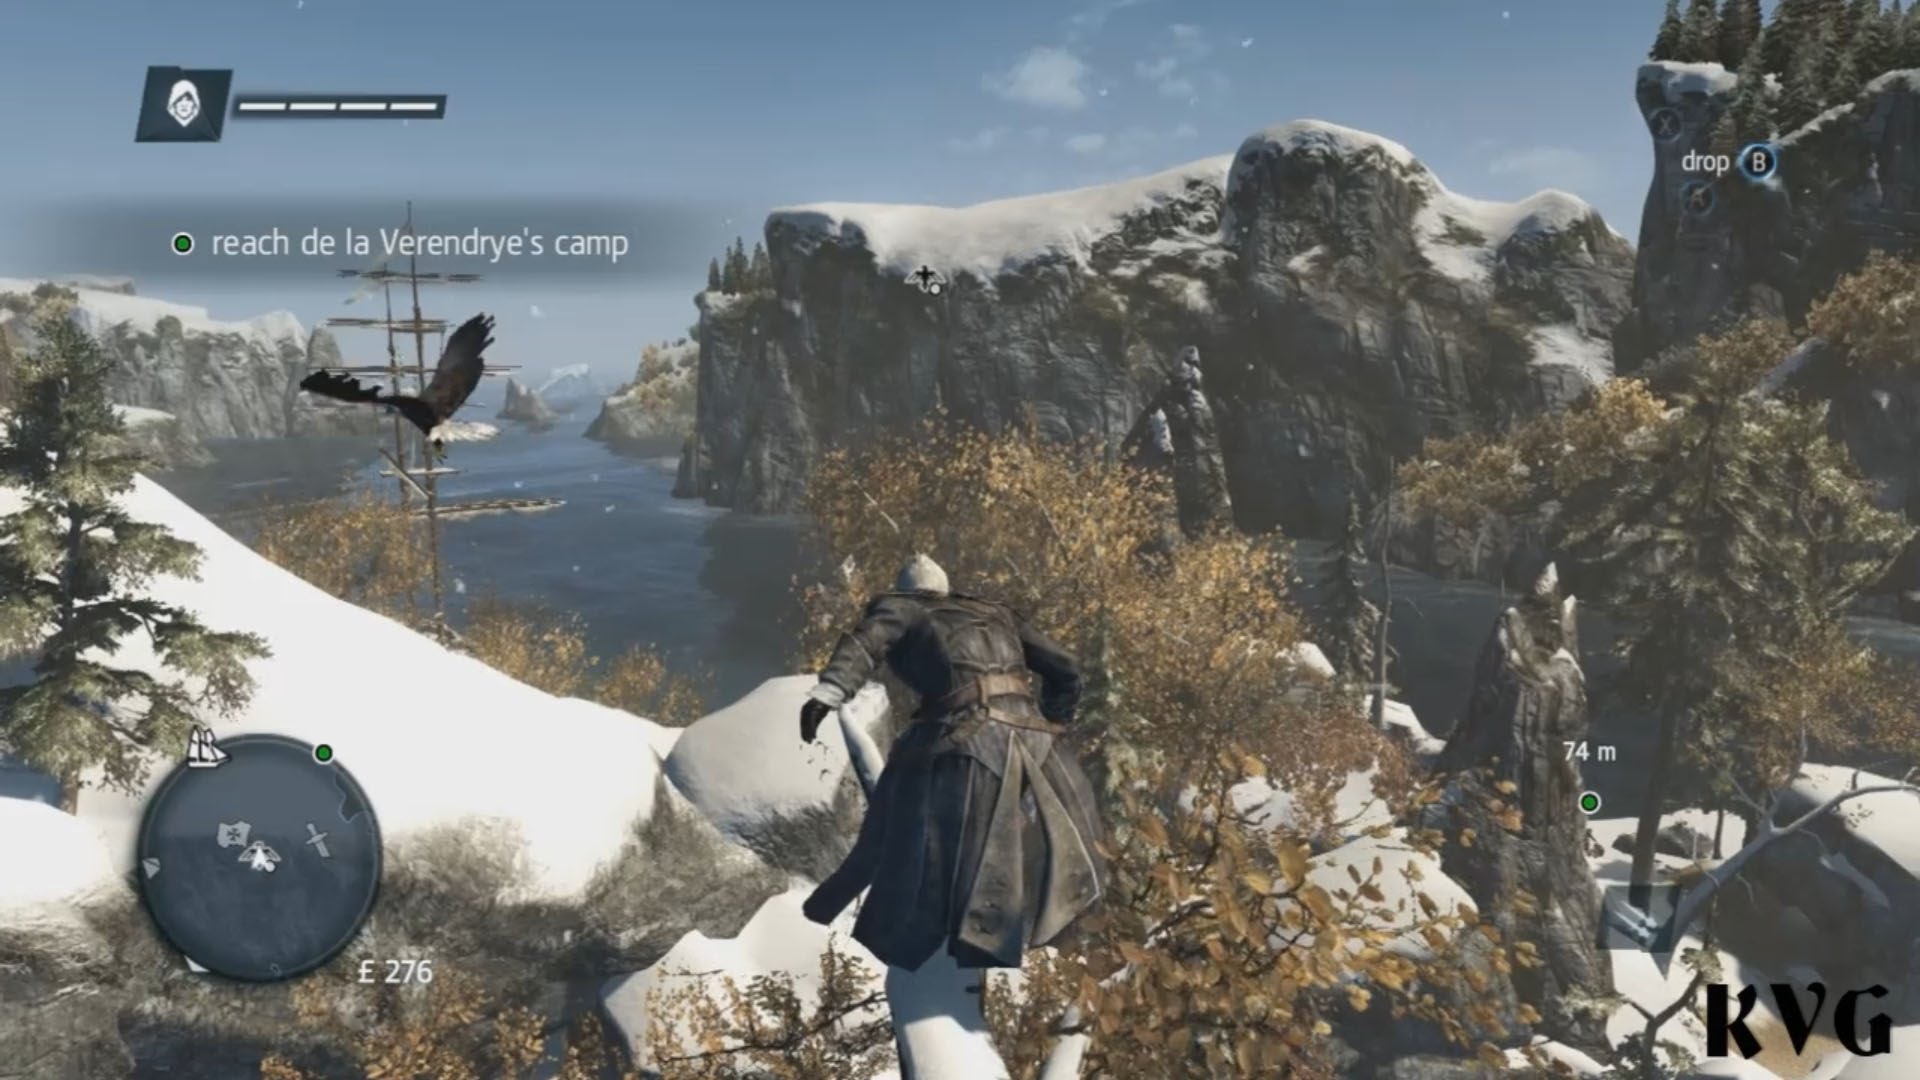 Assassin's Creed: Rogue Backgrounds on Wallpapers Vista